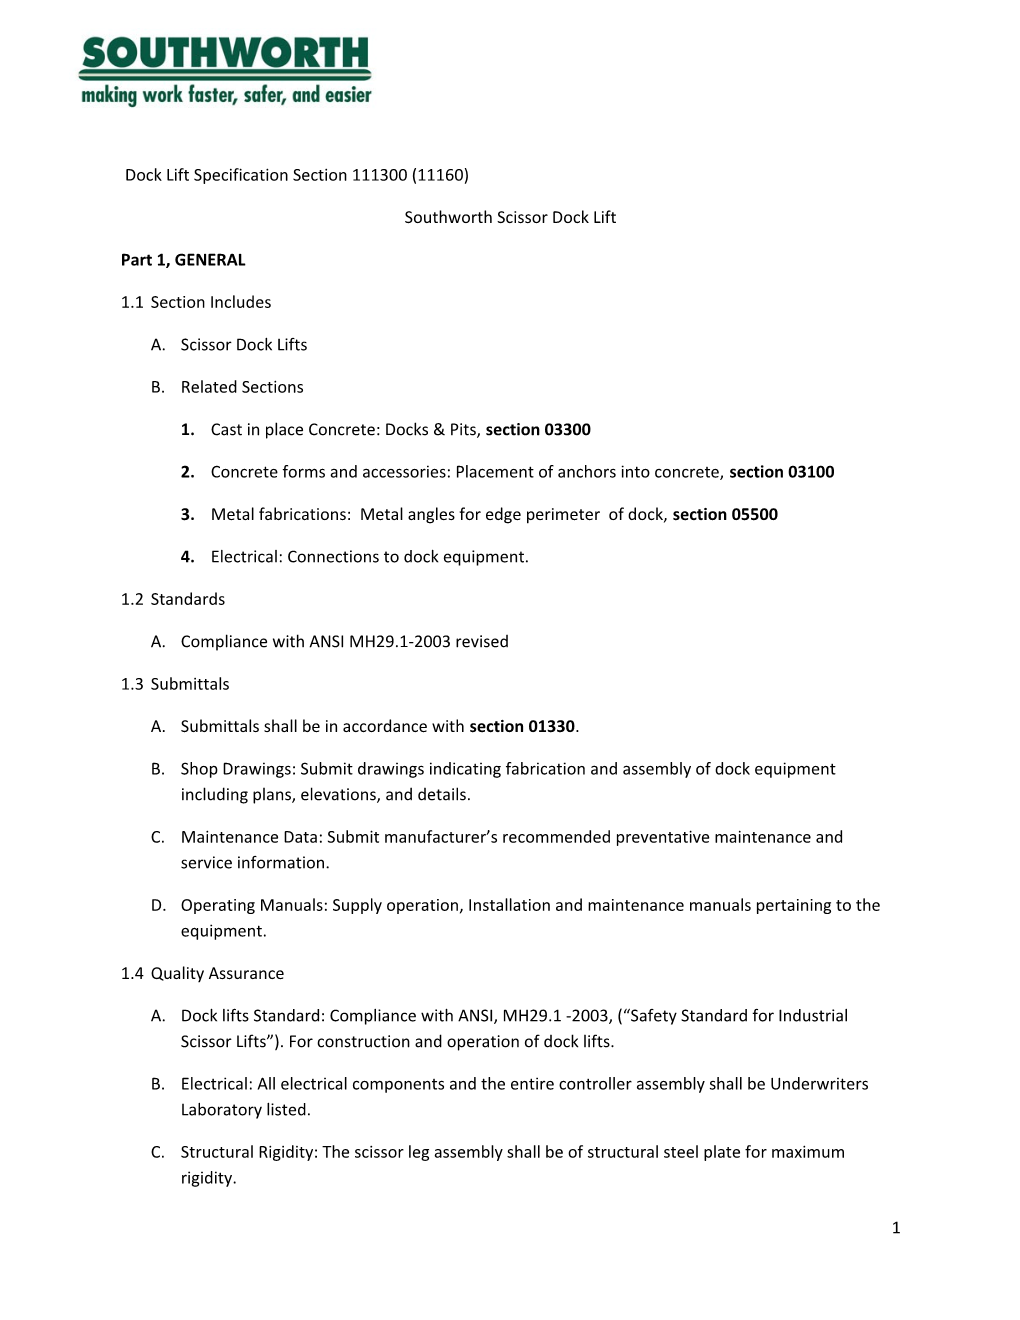 Dock Lift Specification Section 111300 (11160)